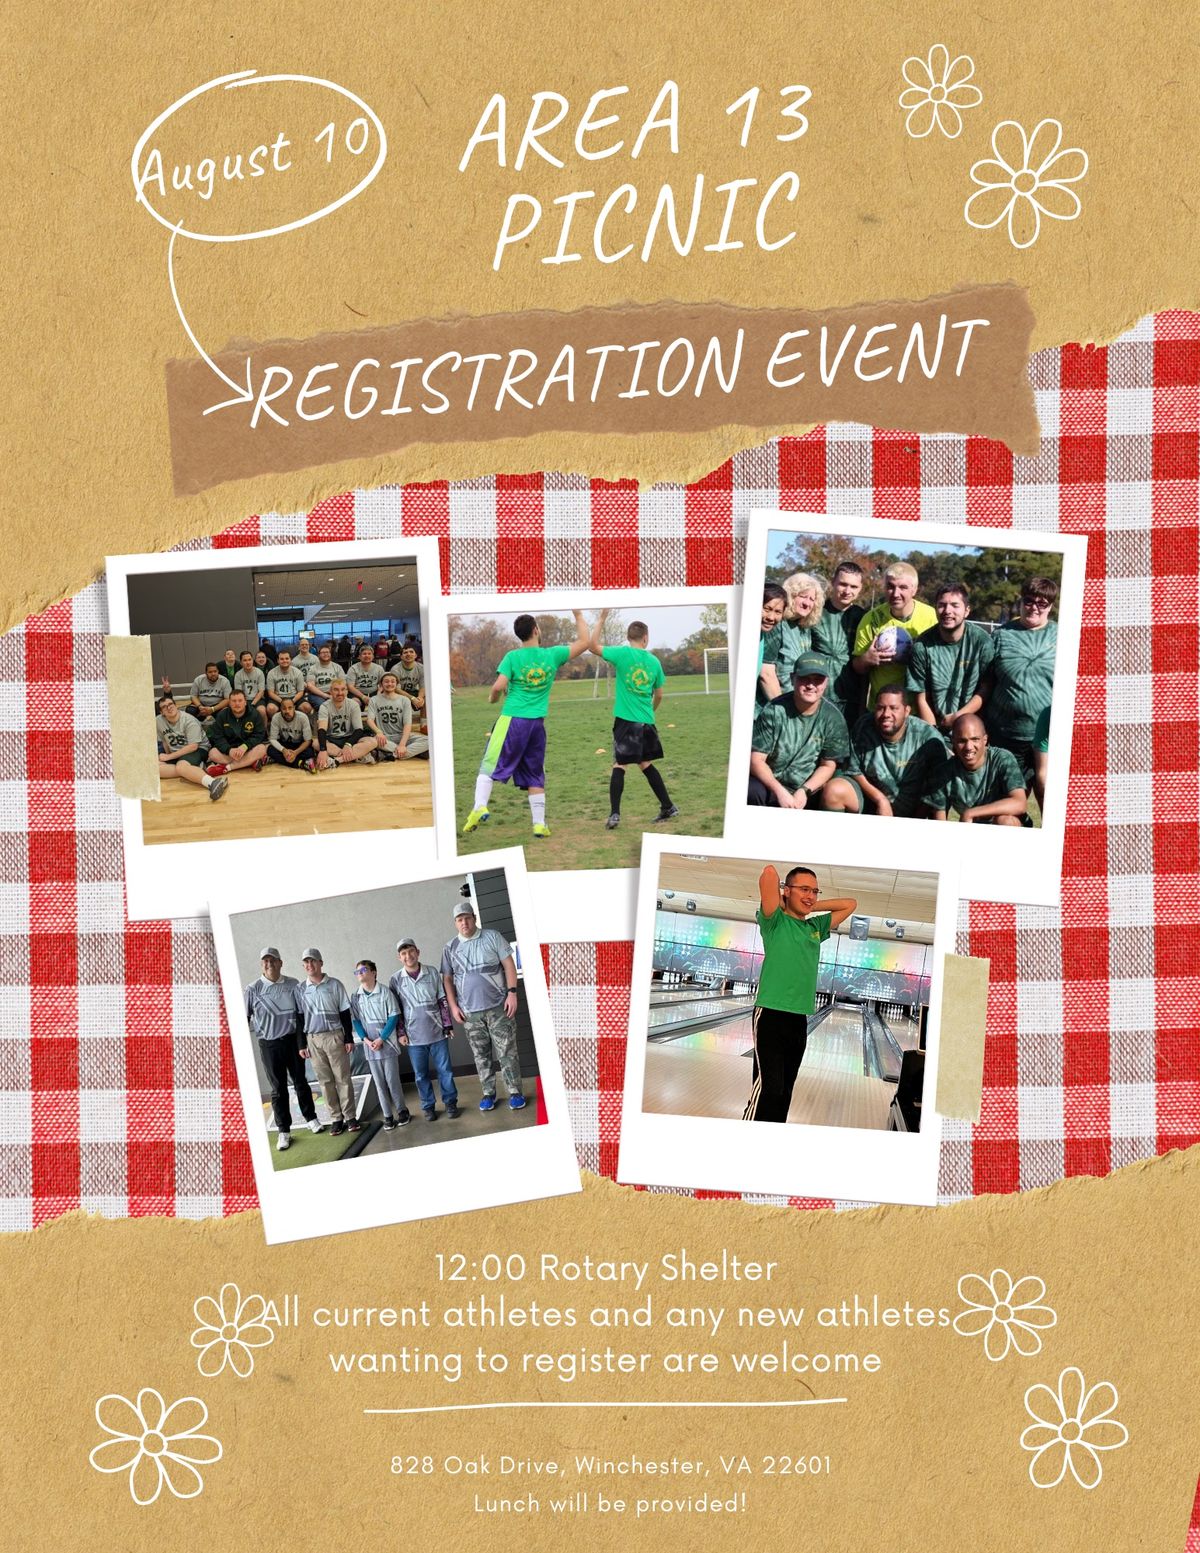 Area 13 Picnic and REGISTRATION event